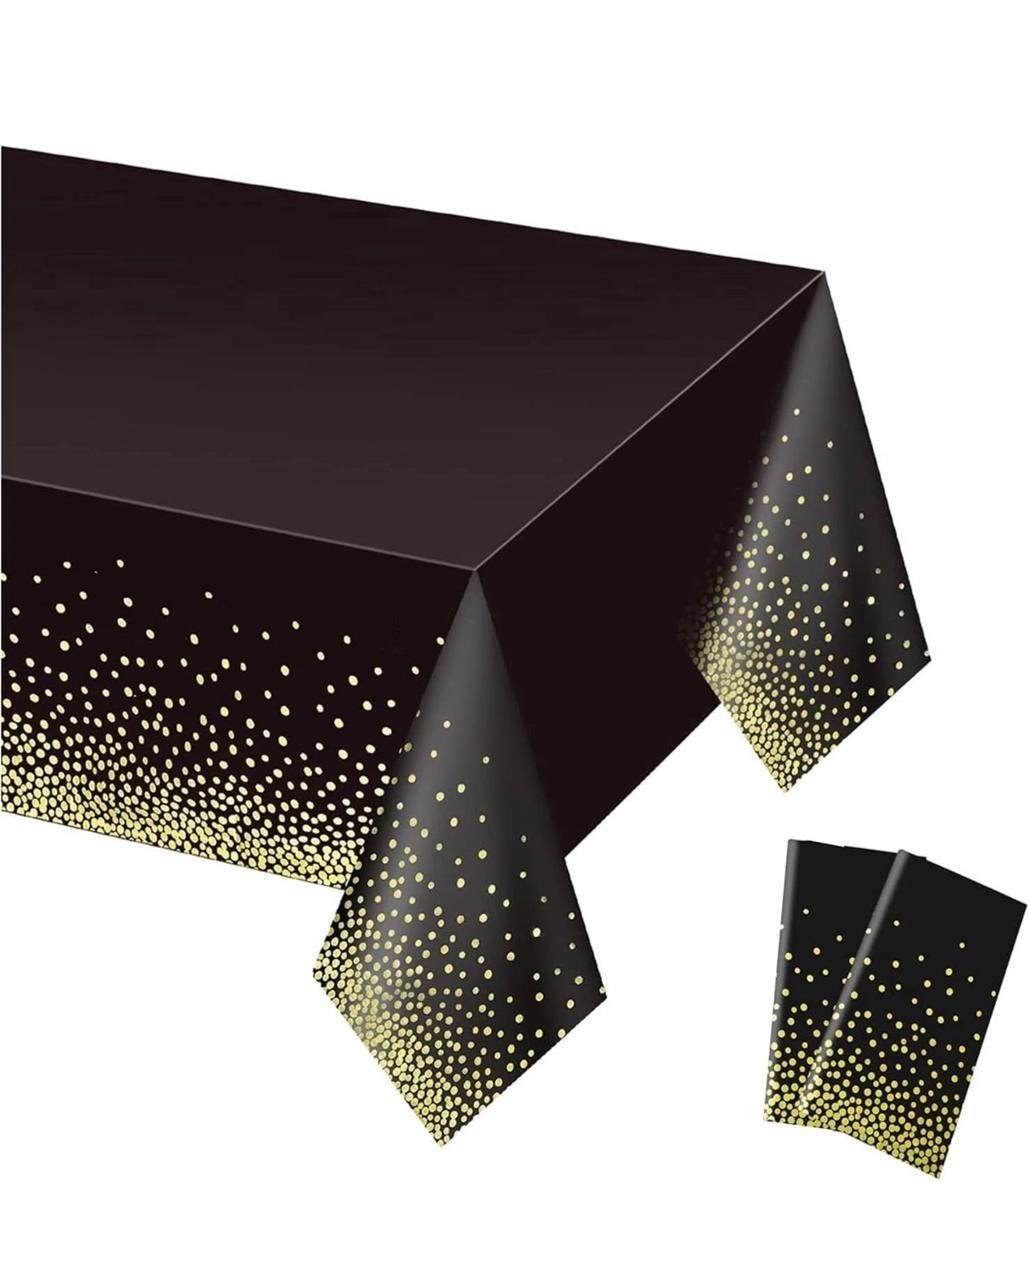 NEW 2-Pack (52"x108") Table Cover